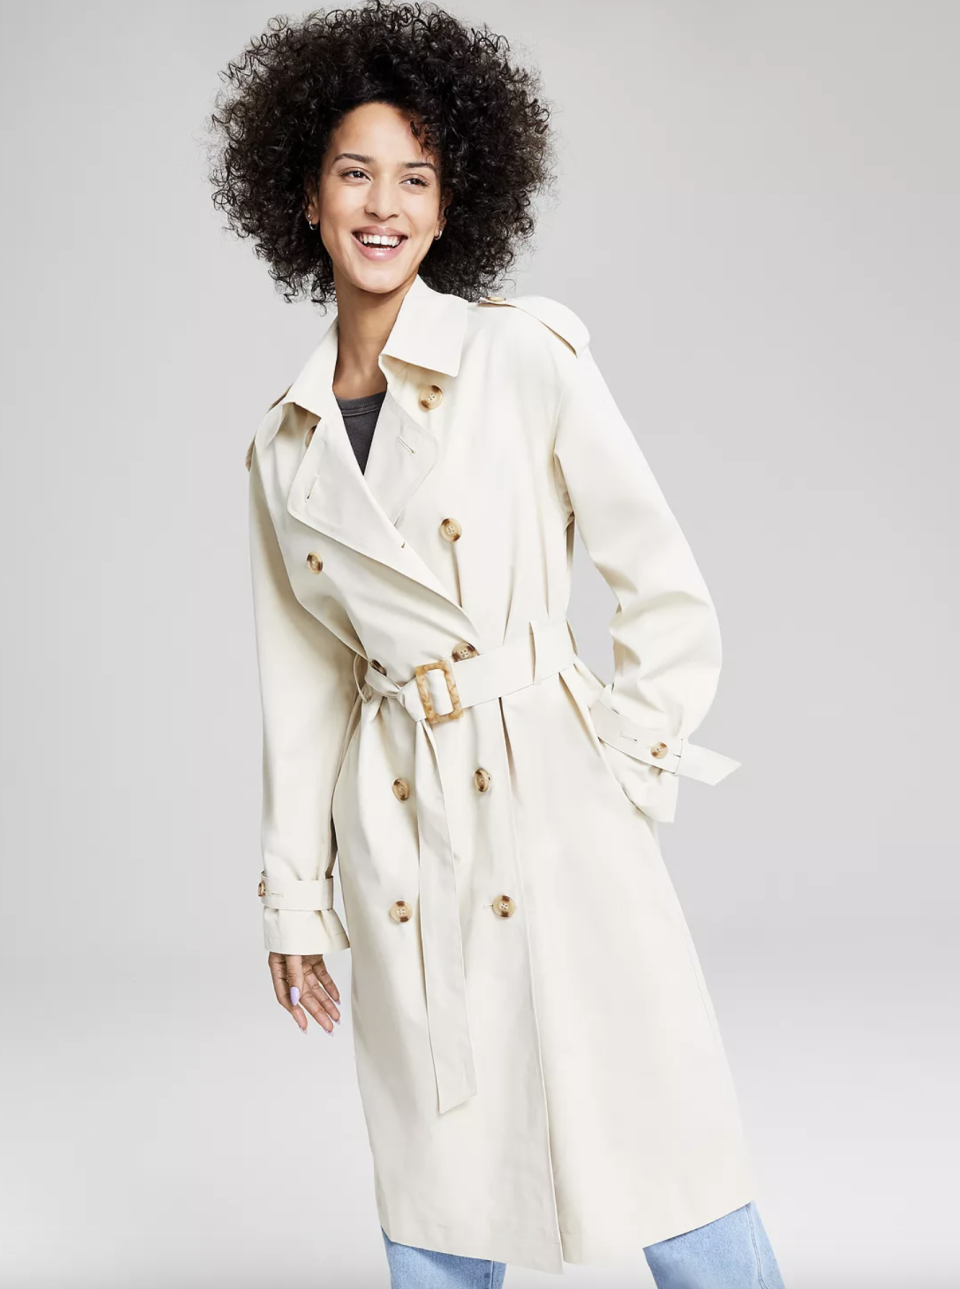 And Now This Women's Long-Sleeve Trench Coat fashion finds